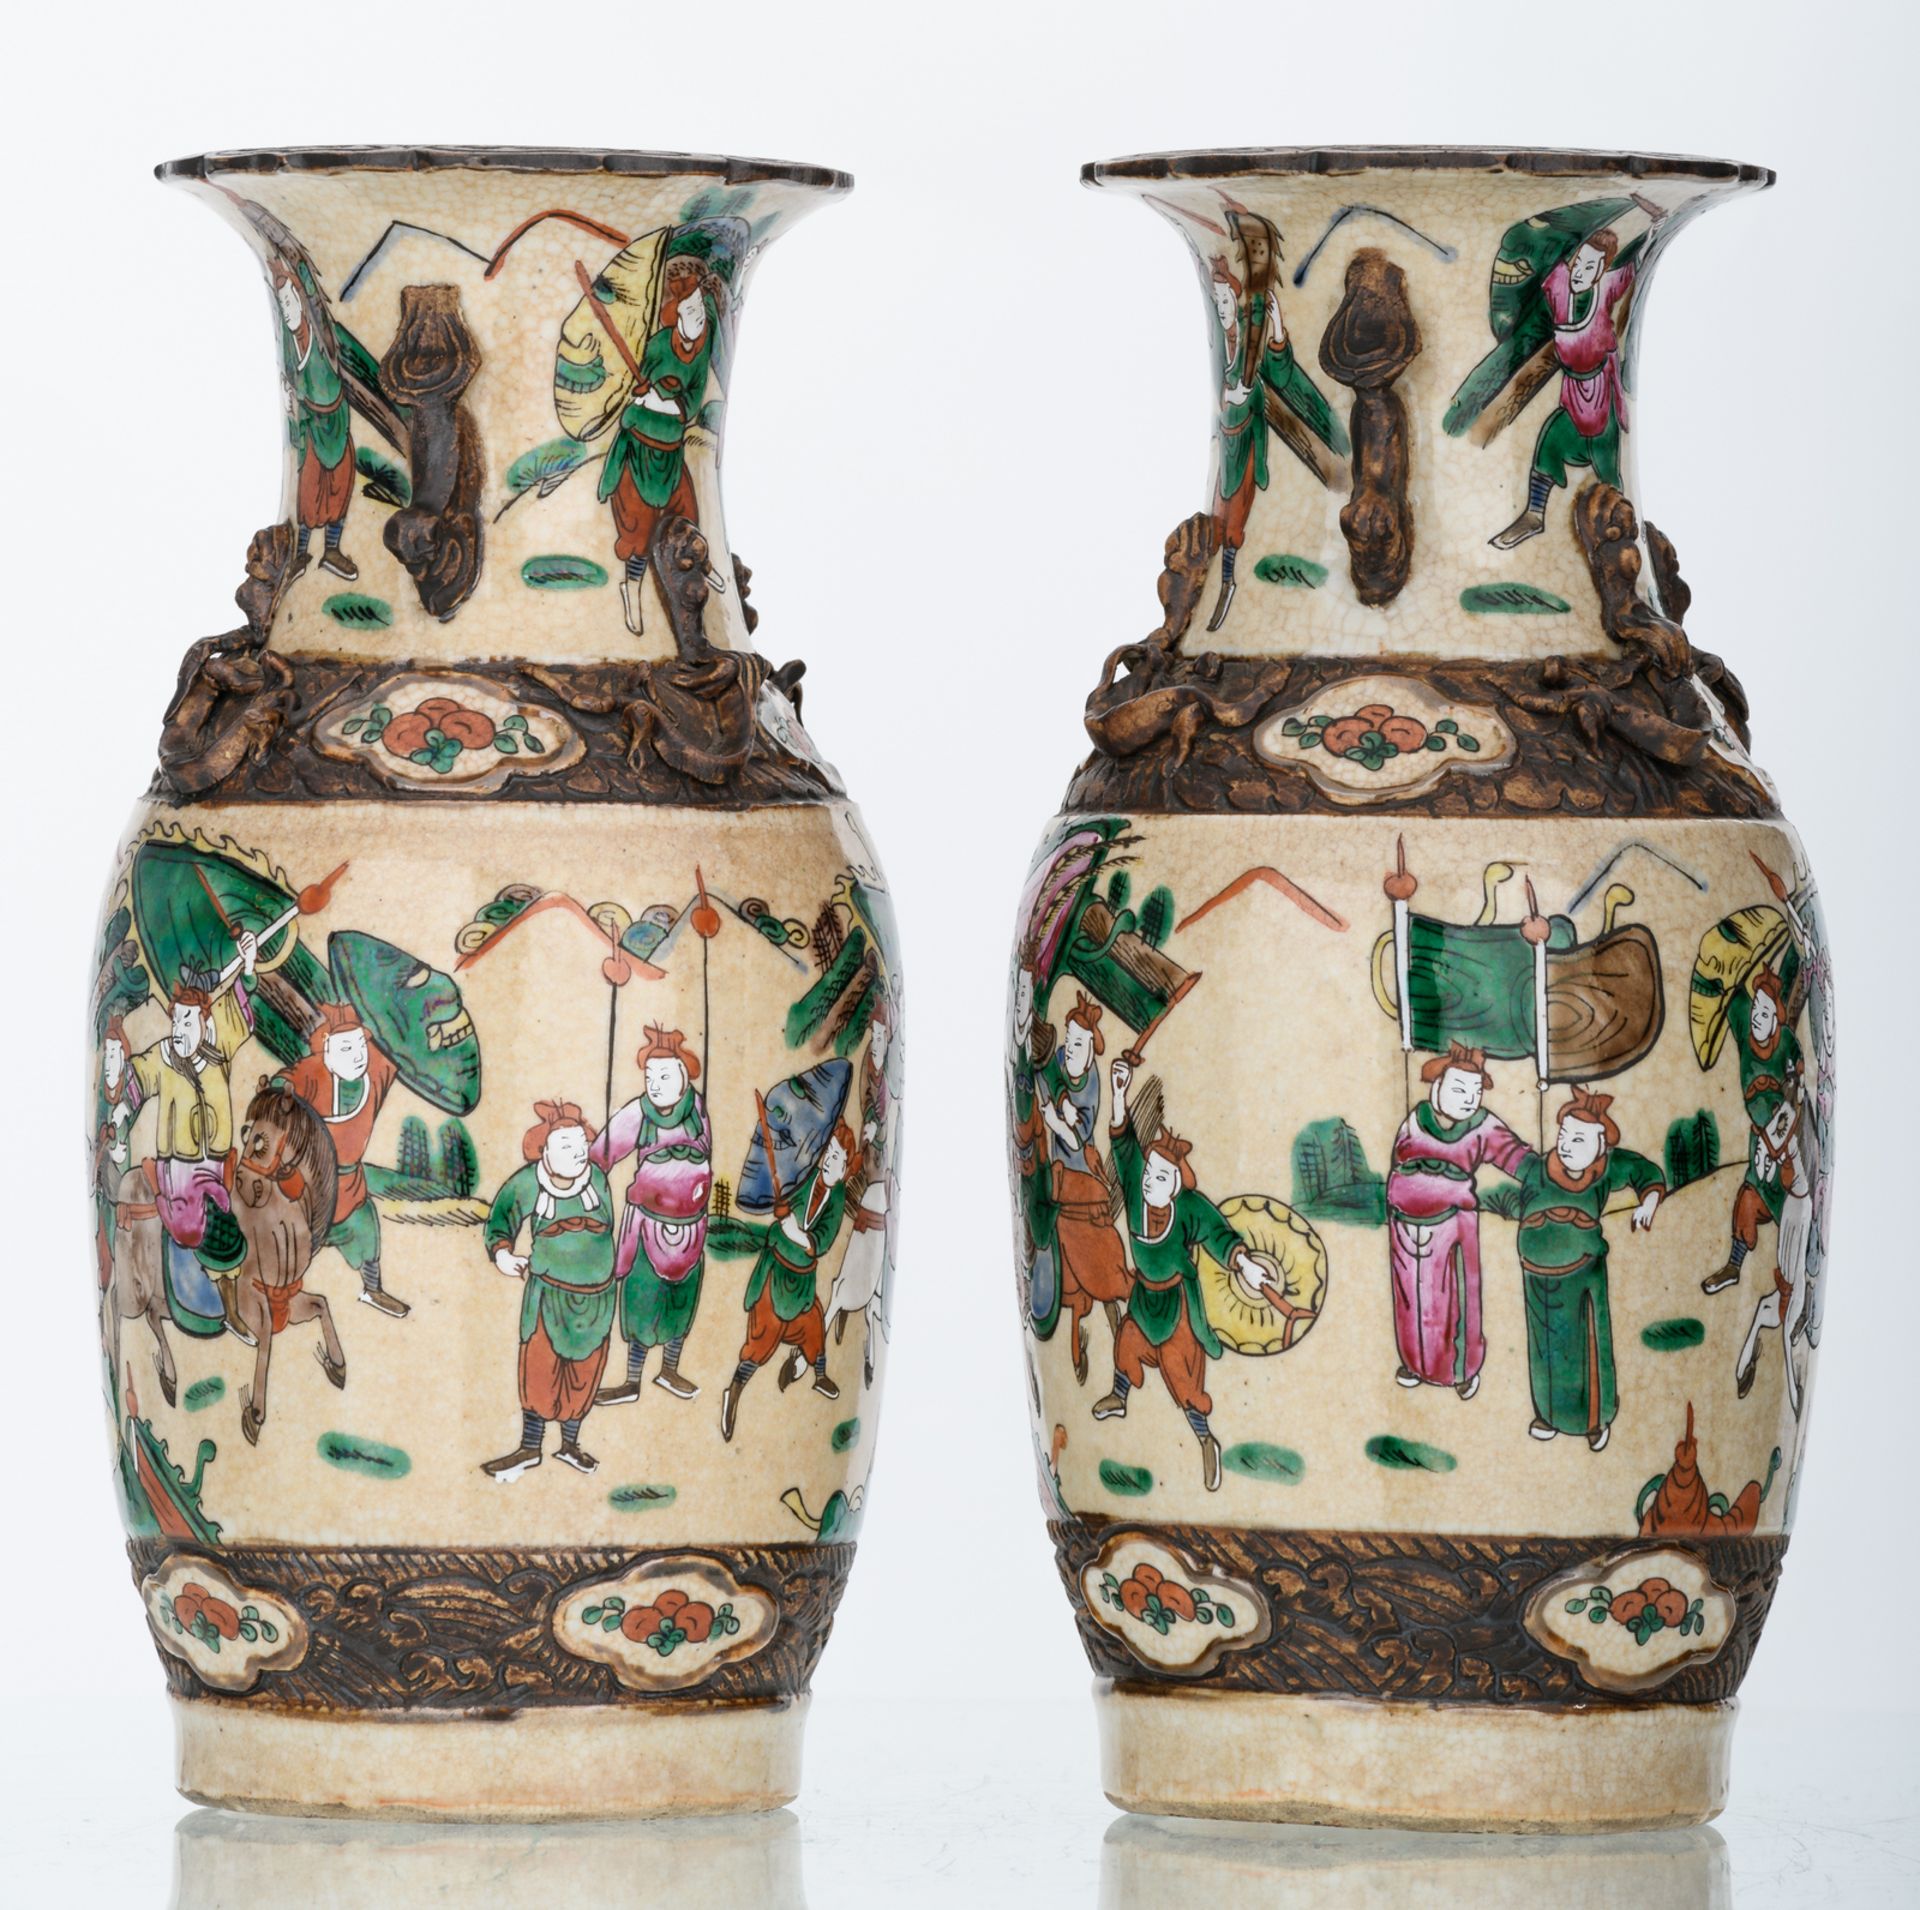 A pair of Chinese stoneware vases, overall polychrome decorated with warriors, marked, about 1900, H - Image 3 of 6